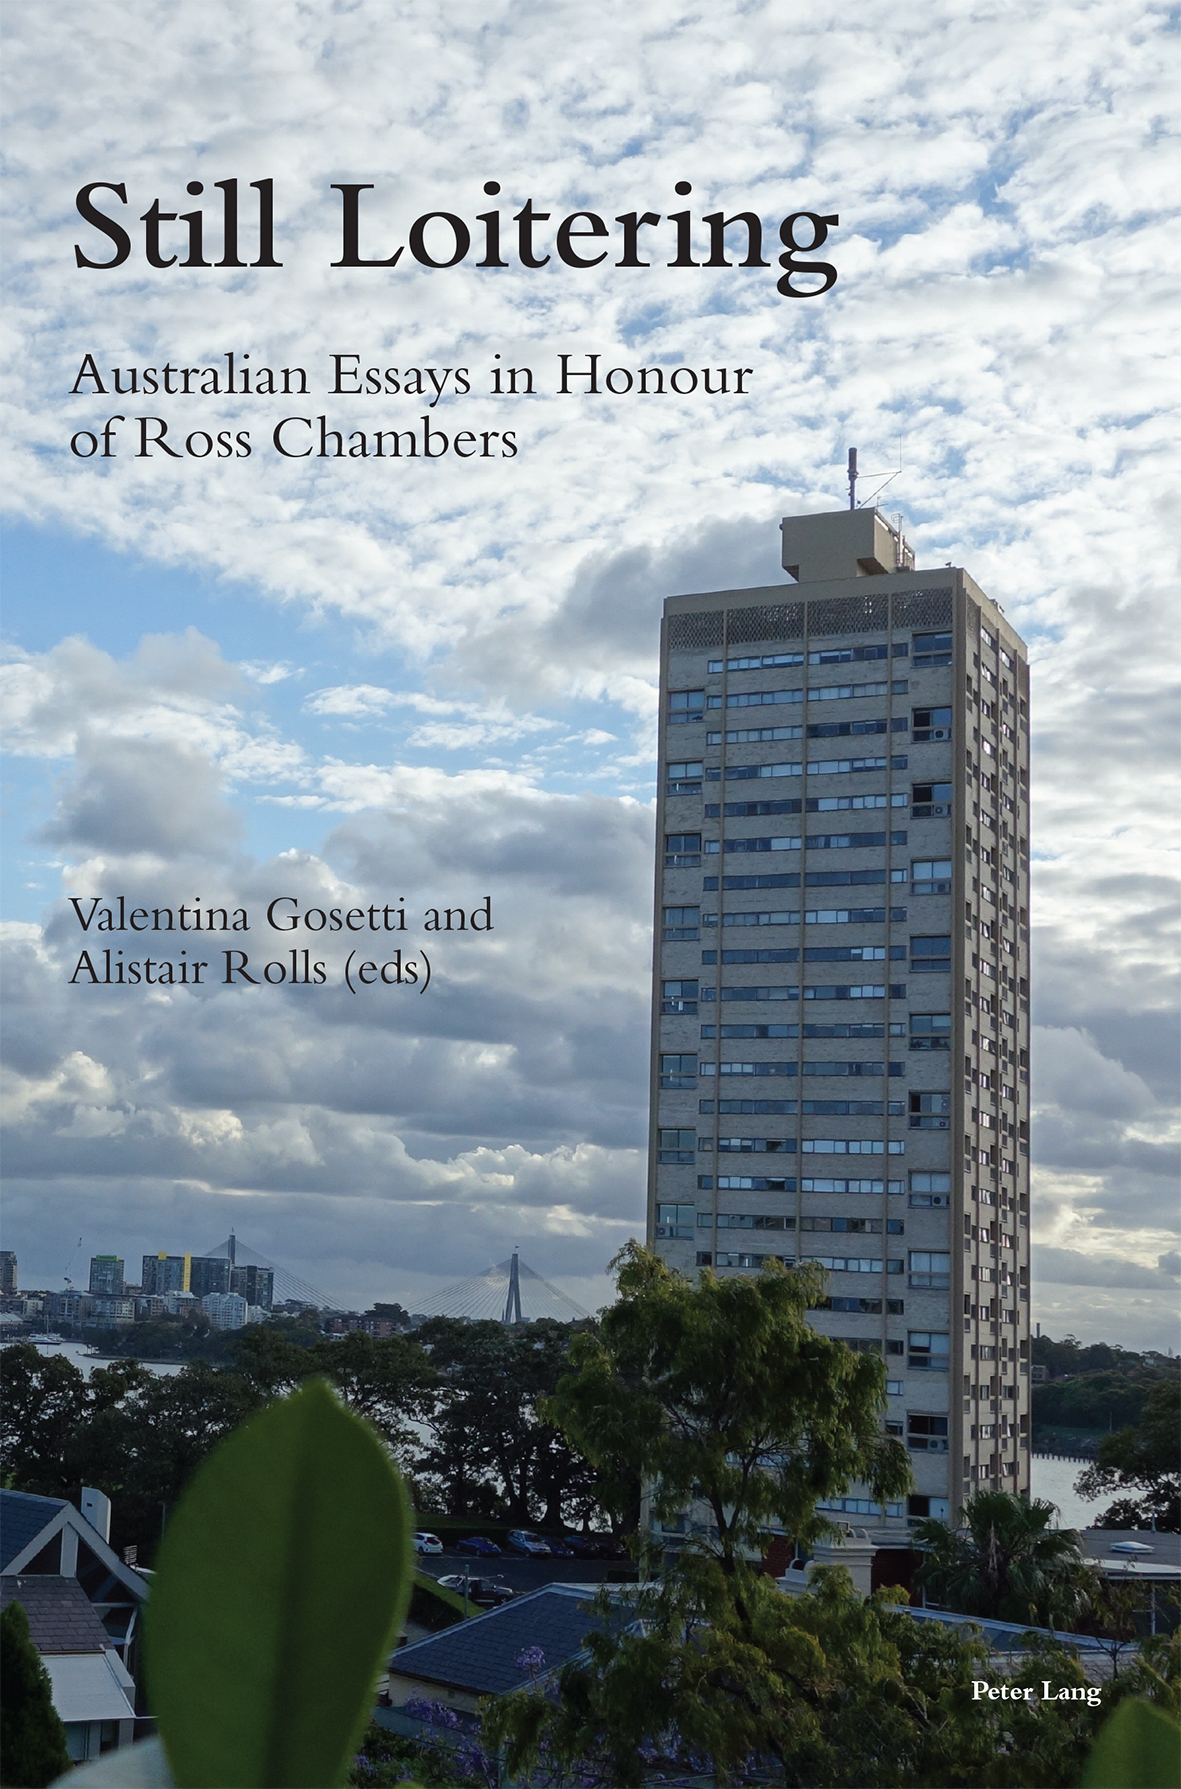 Book cover with a high-rise tower against a cloudy sky 